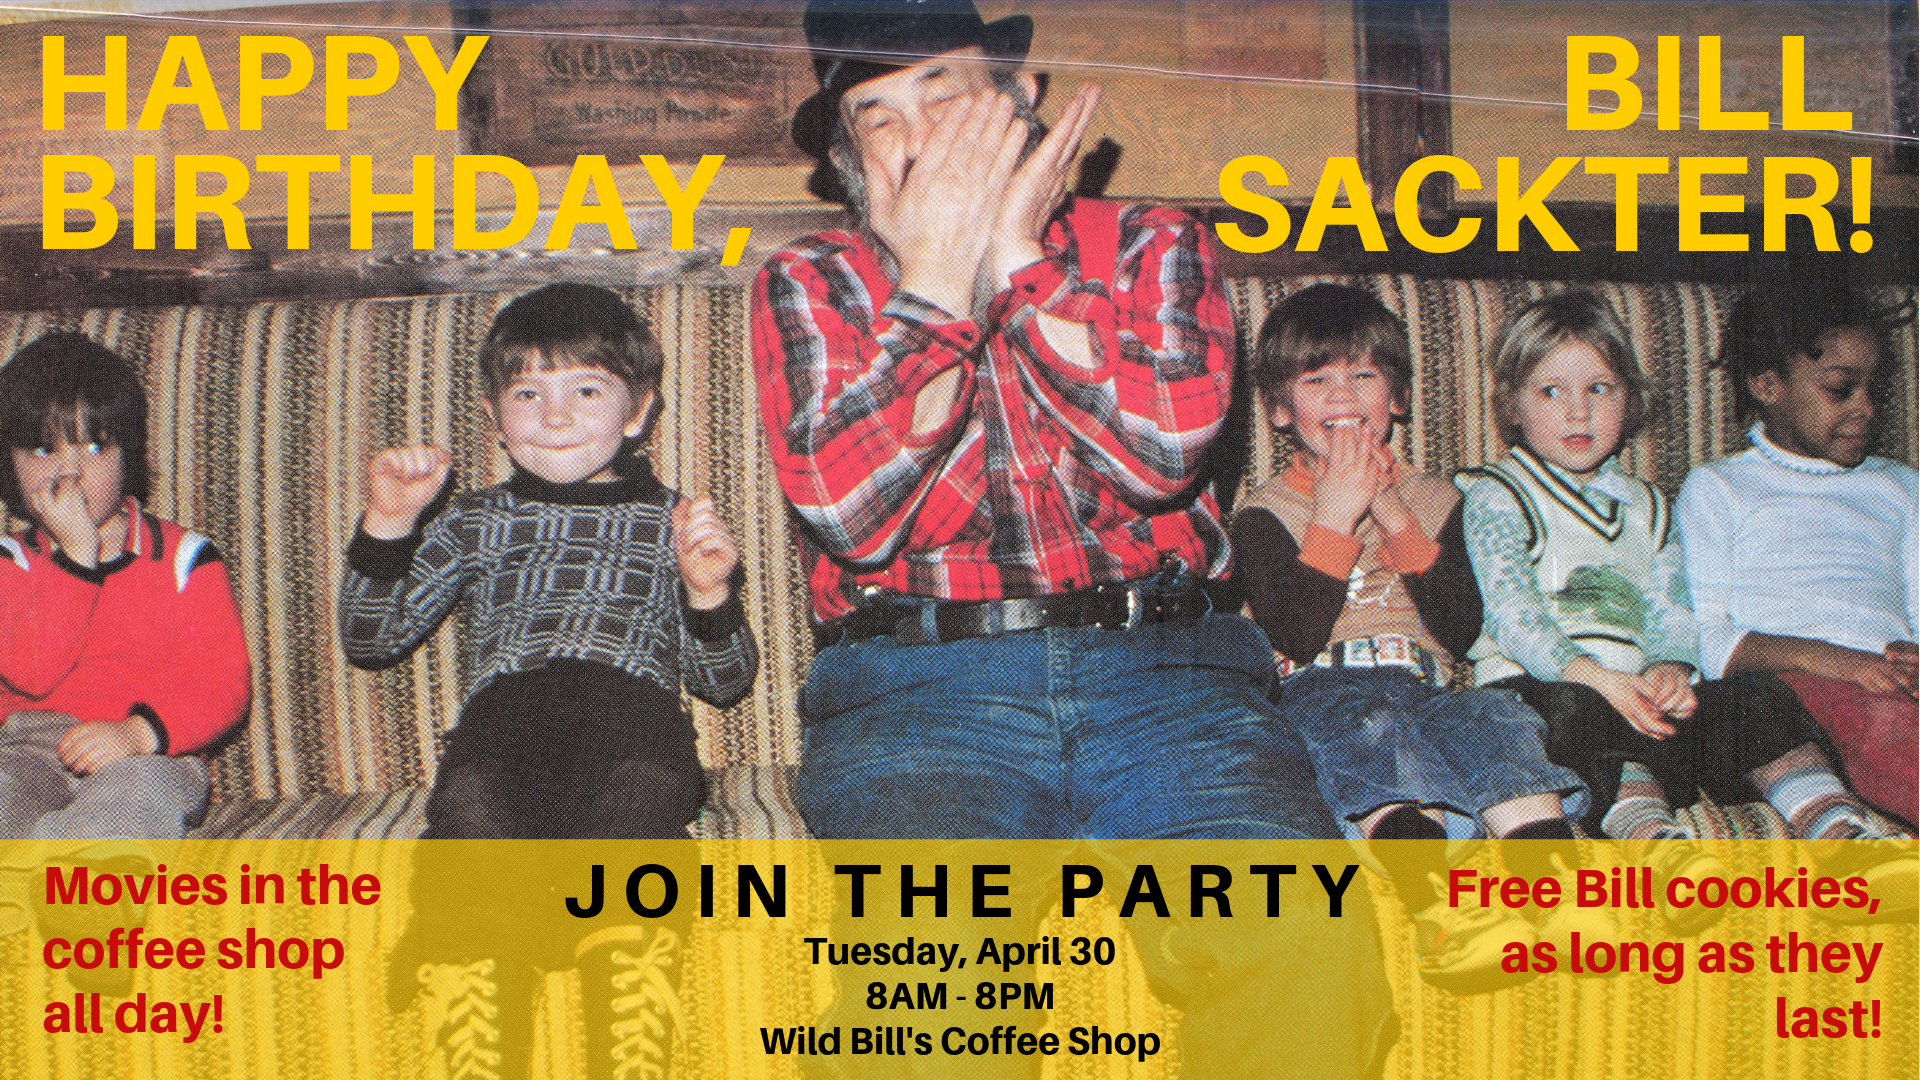 Bill Sackter's birthday party April 30, 8a-8p in Wild Bill's